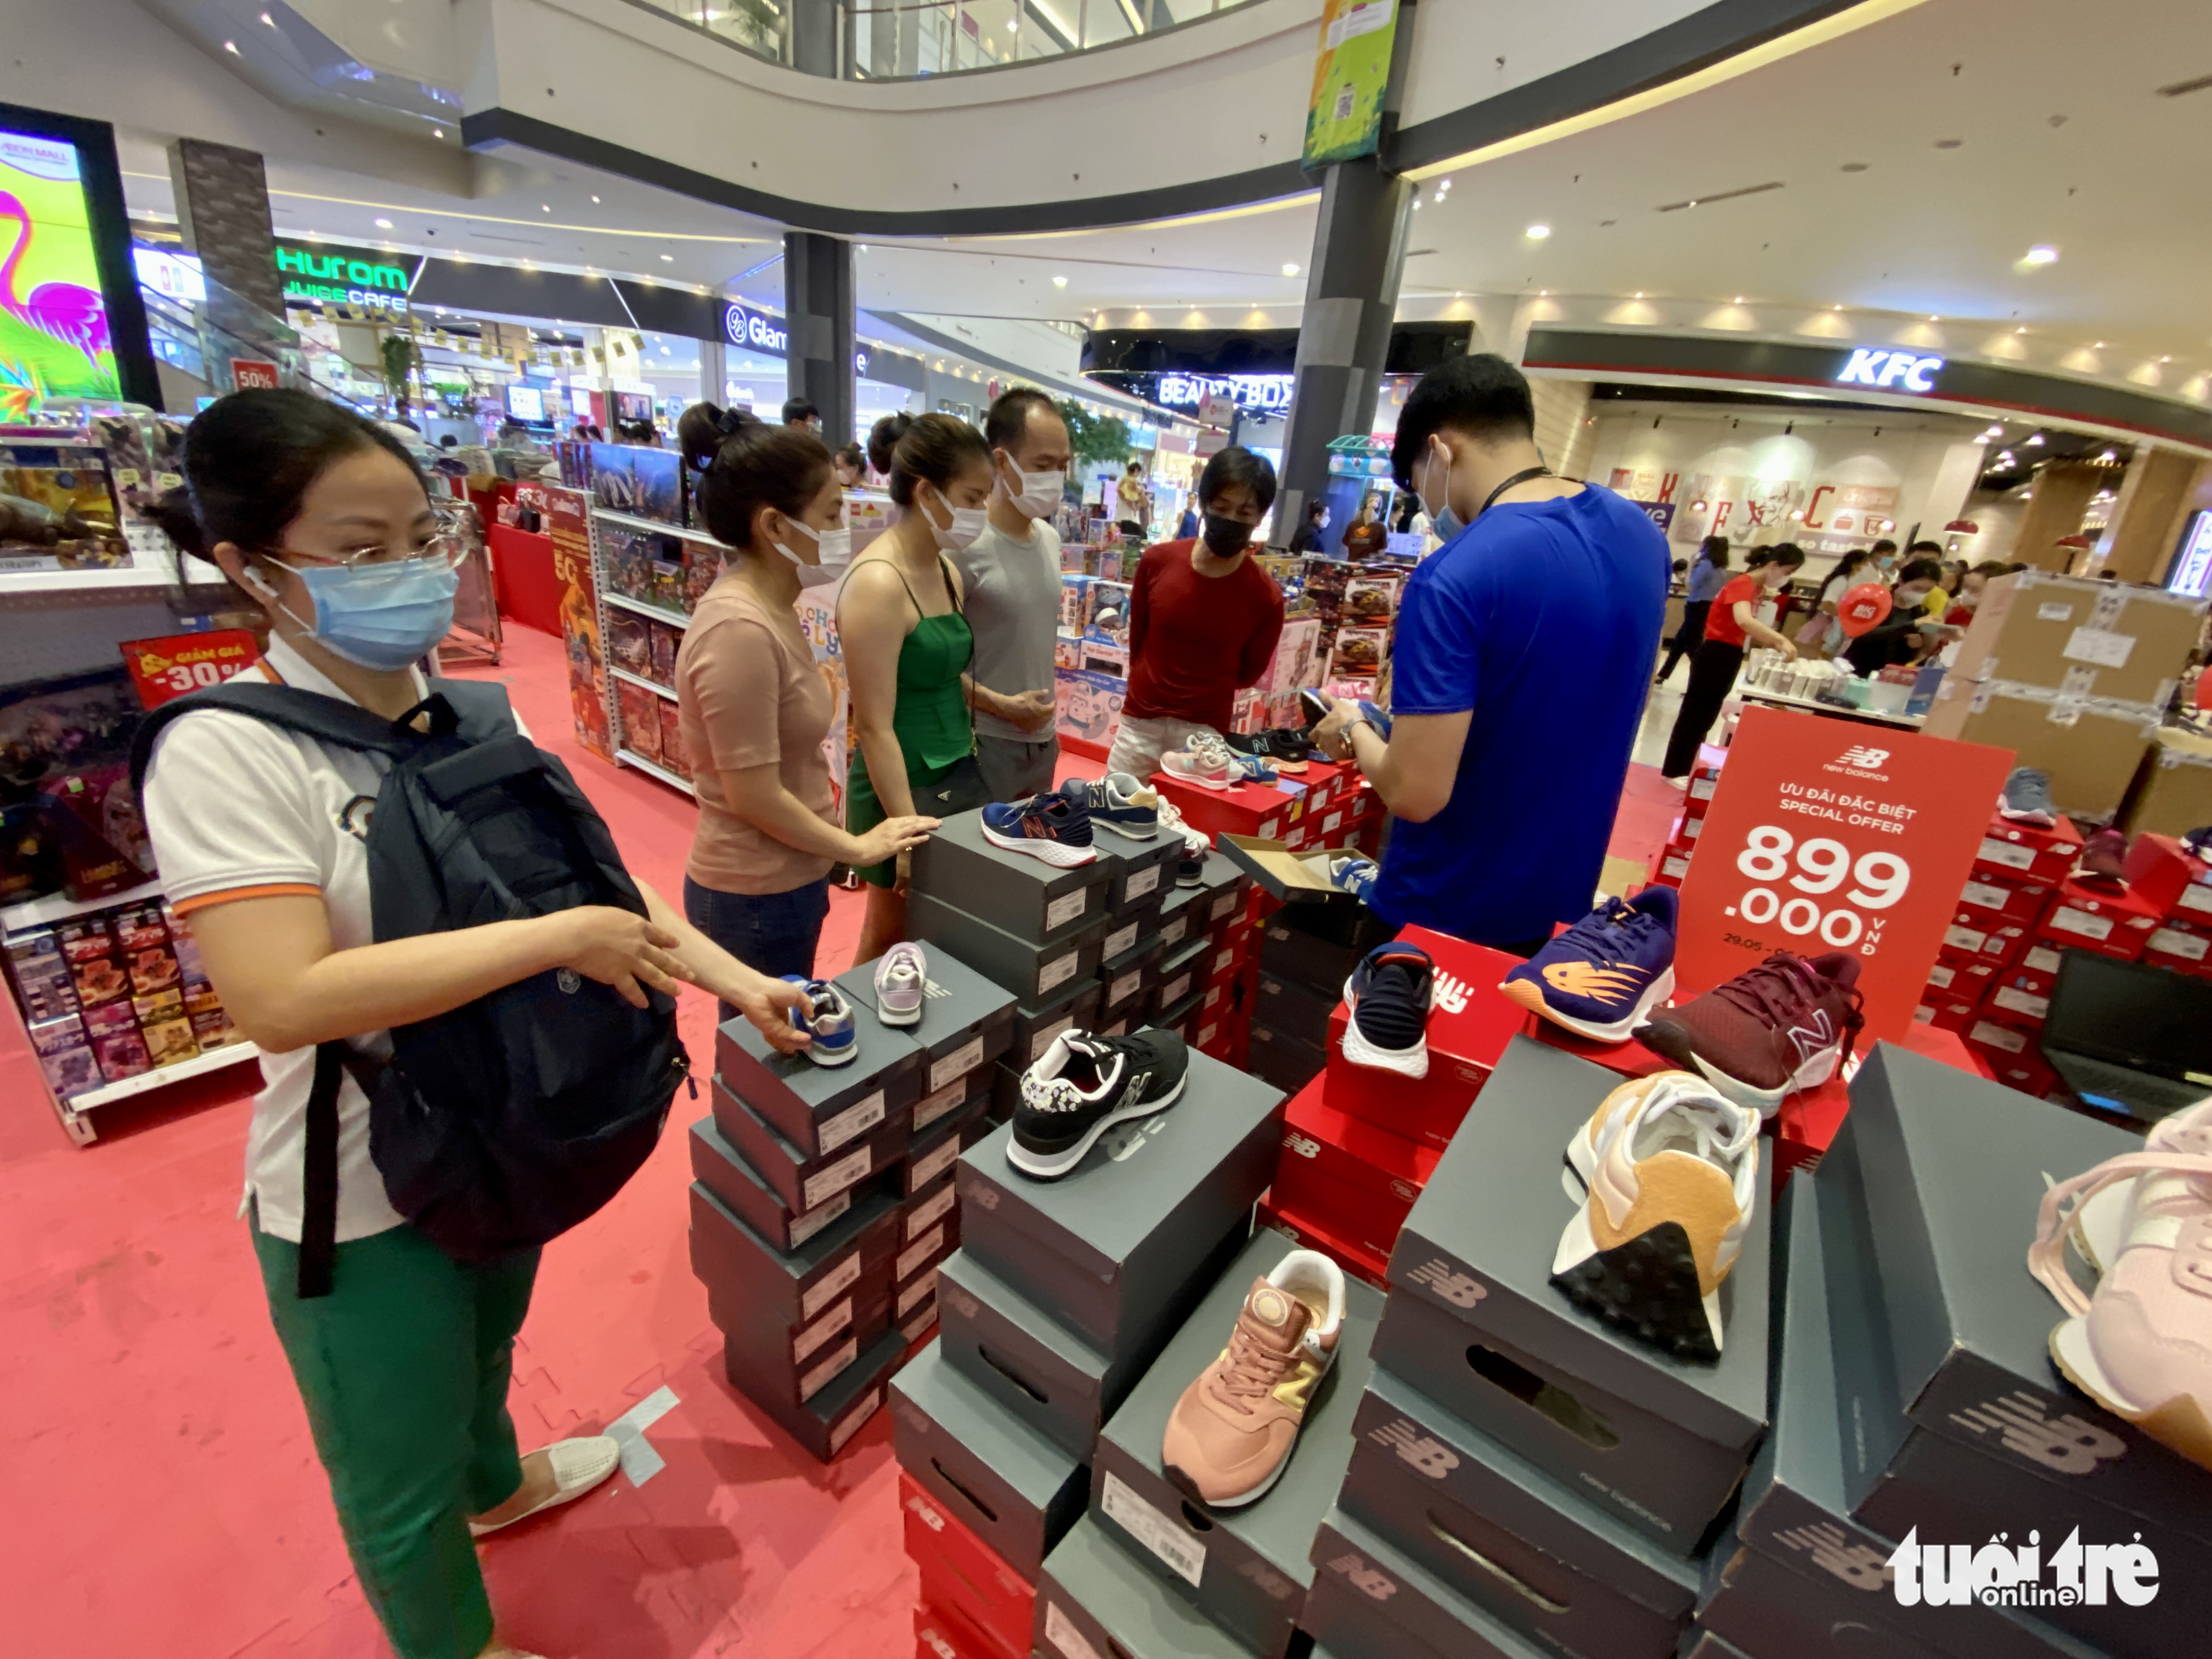 People go shopping at Aeon Mall in Tan Phu District, Ho Chi Minh City, May 29, 2022. Photo: Bong Mai / Tuoi Tre